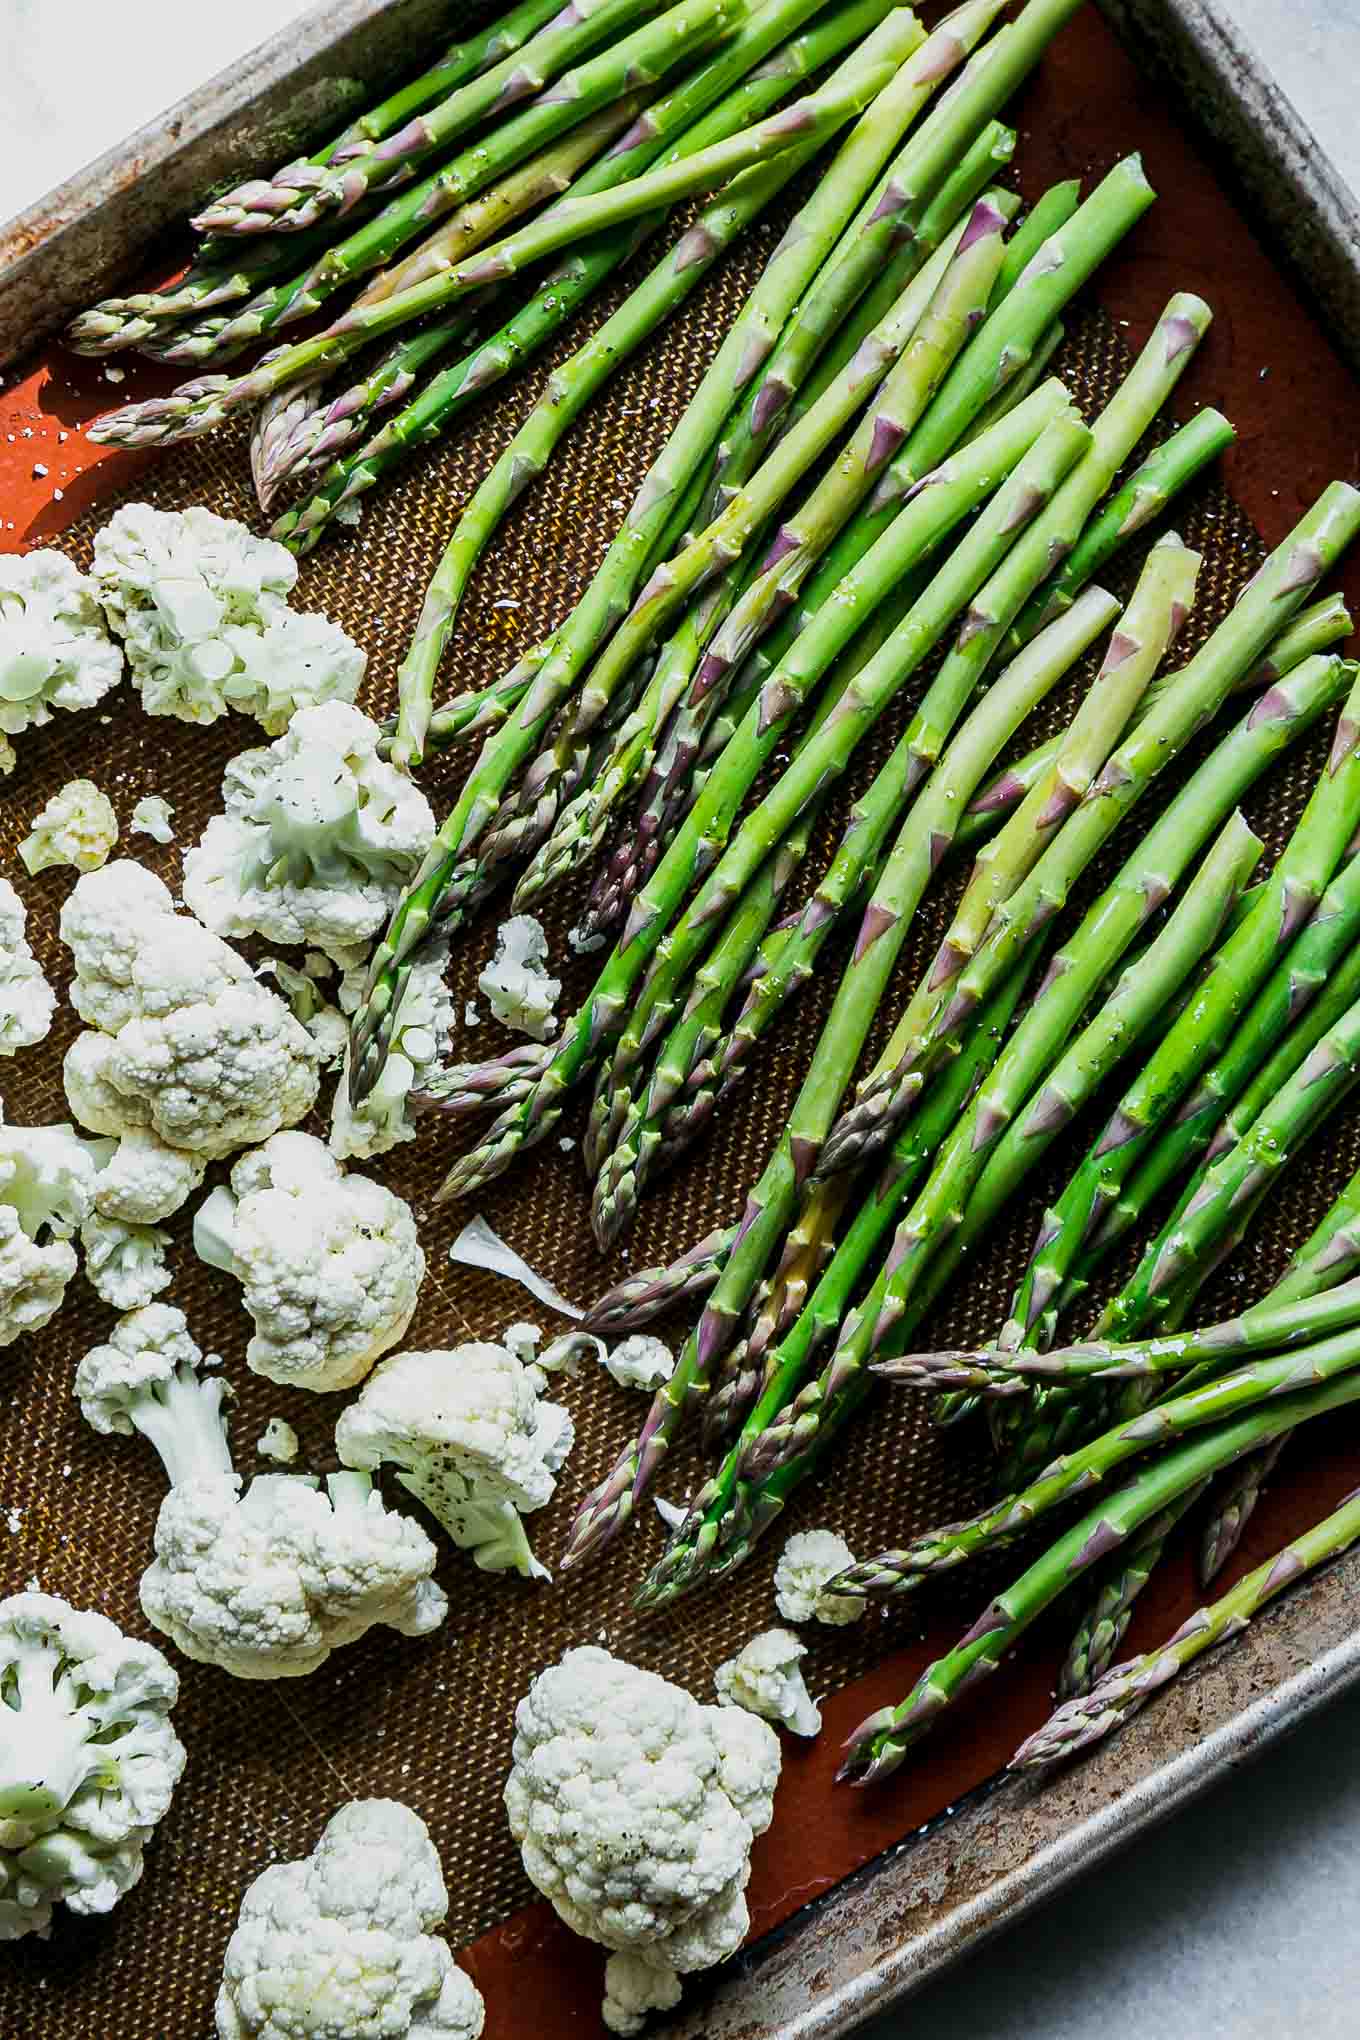 cauliflower florets and asparagus spears on a baking sheet before roasting